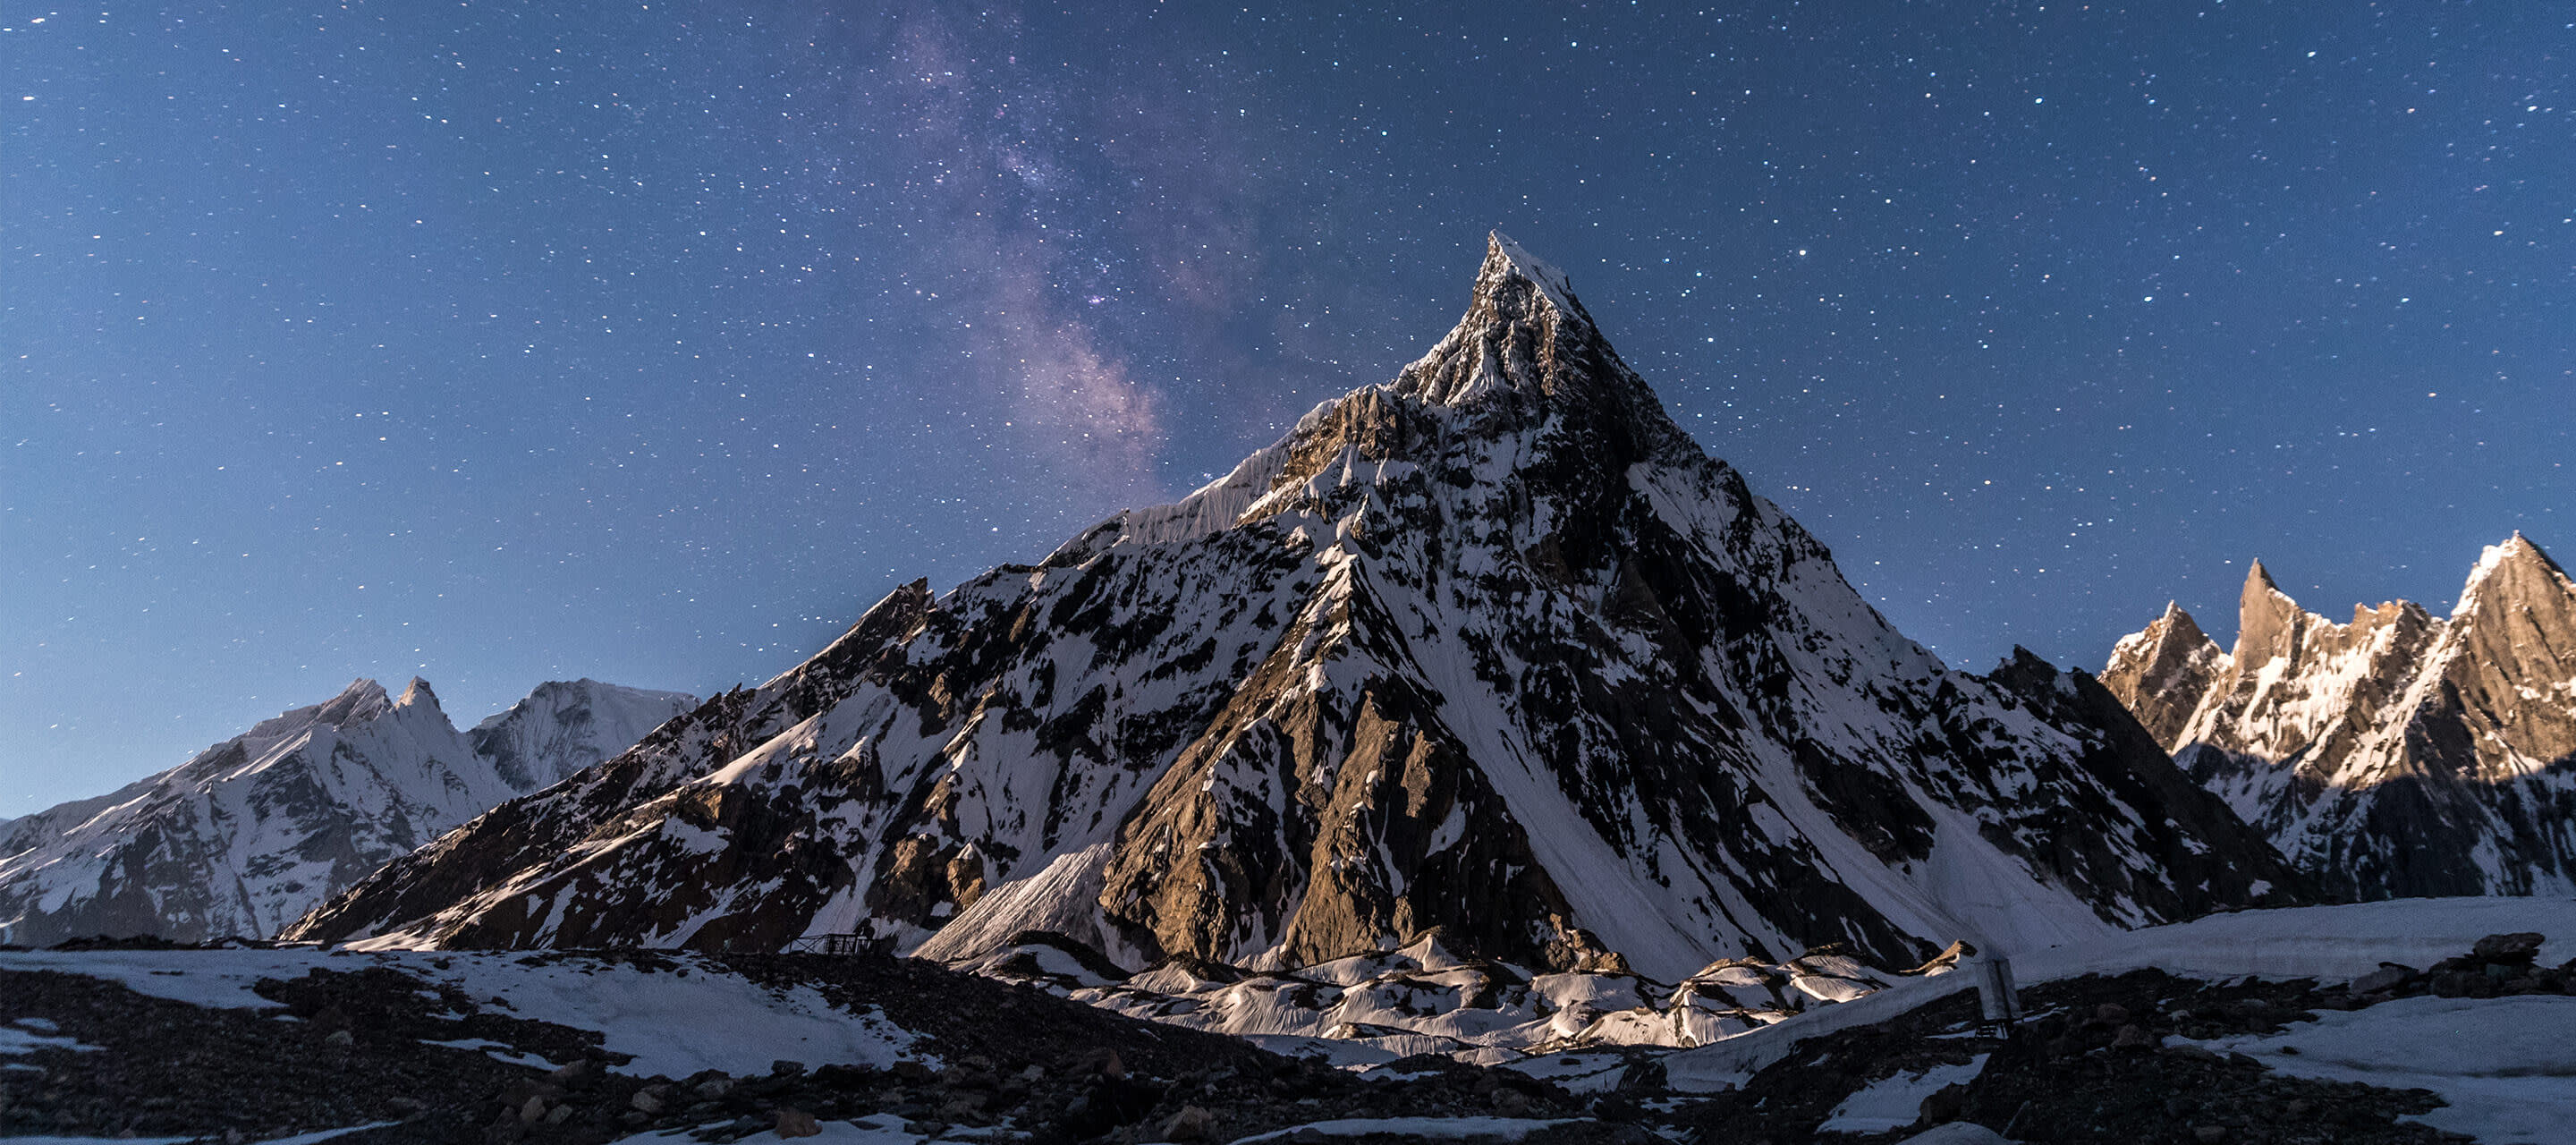 image of mountain with stars in background